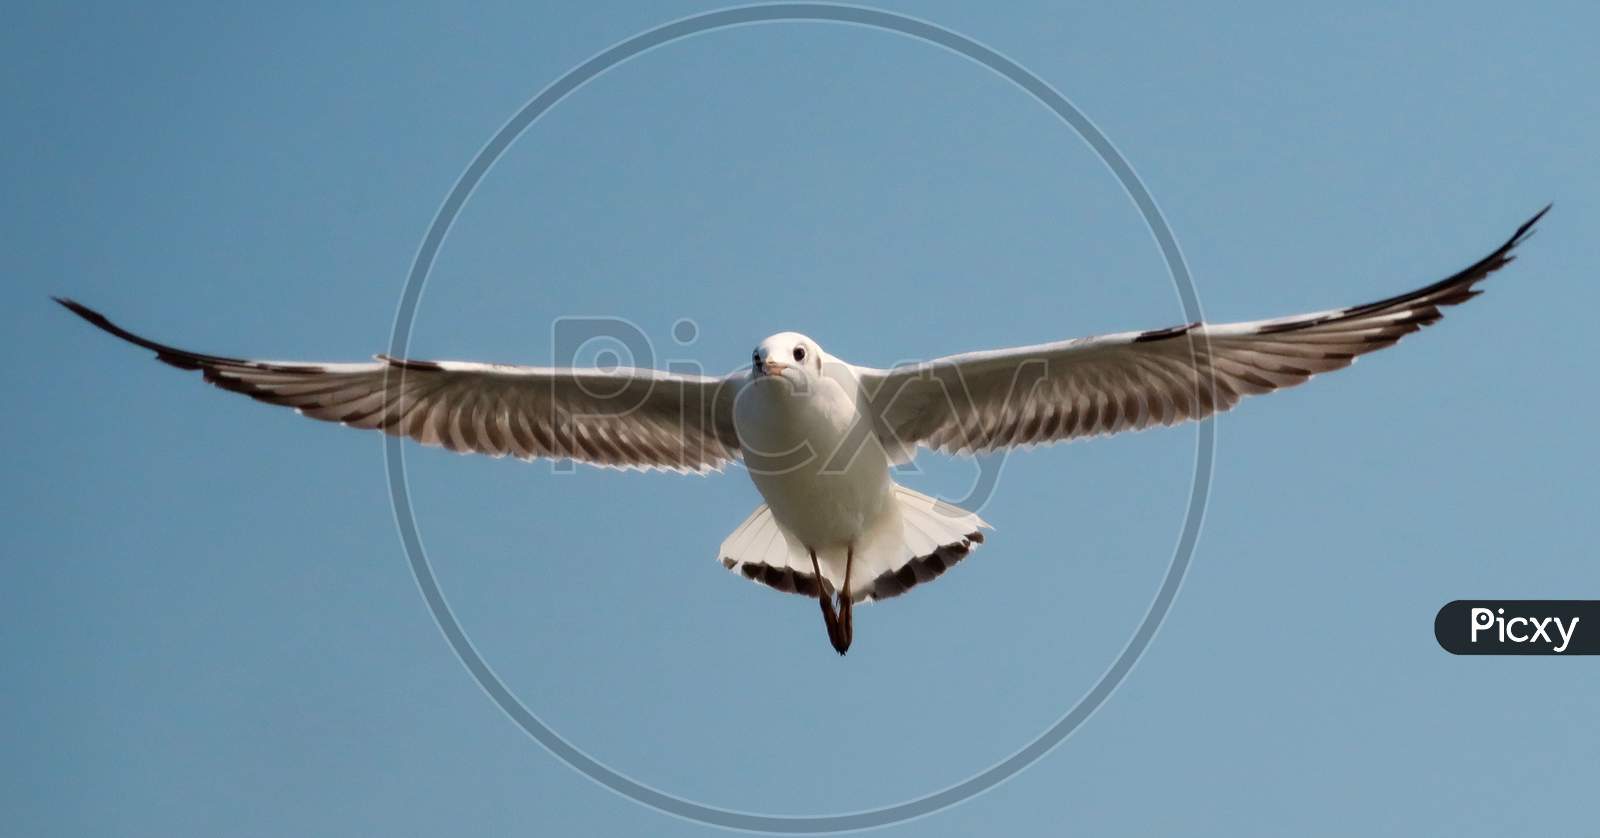 A Seagull during its flight